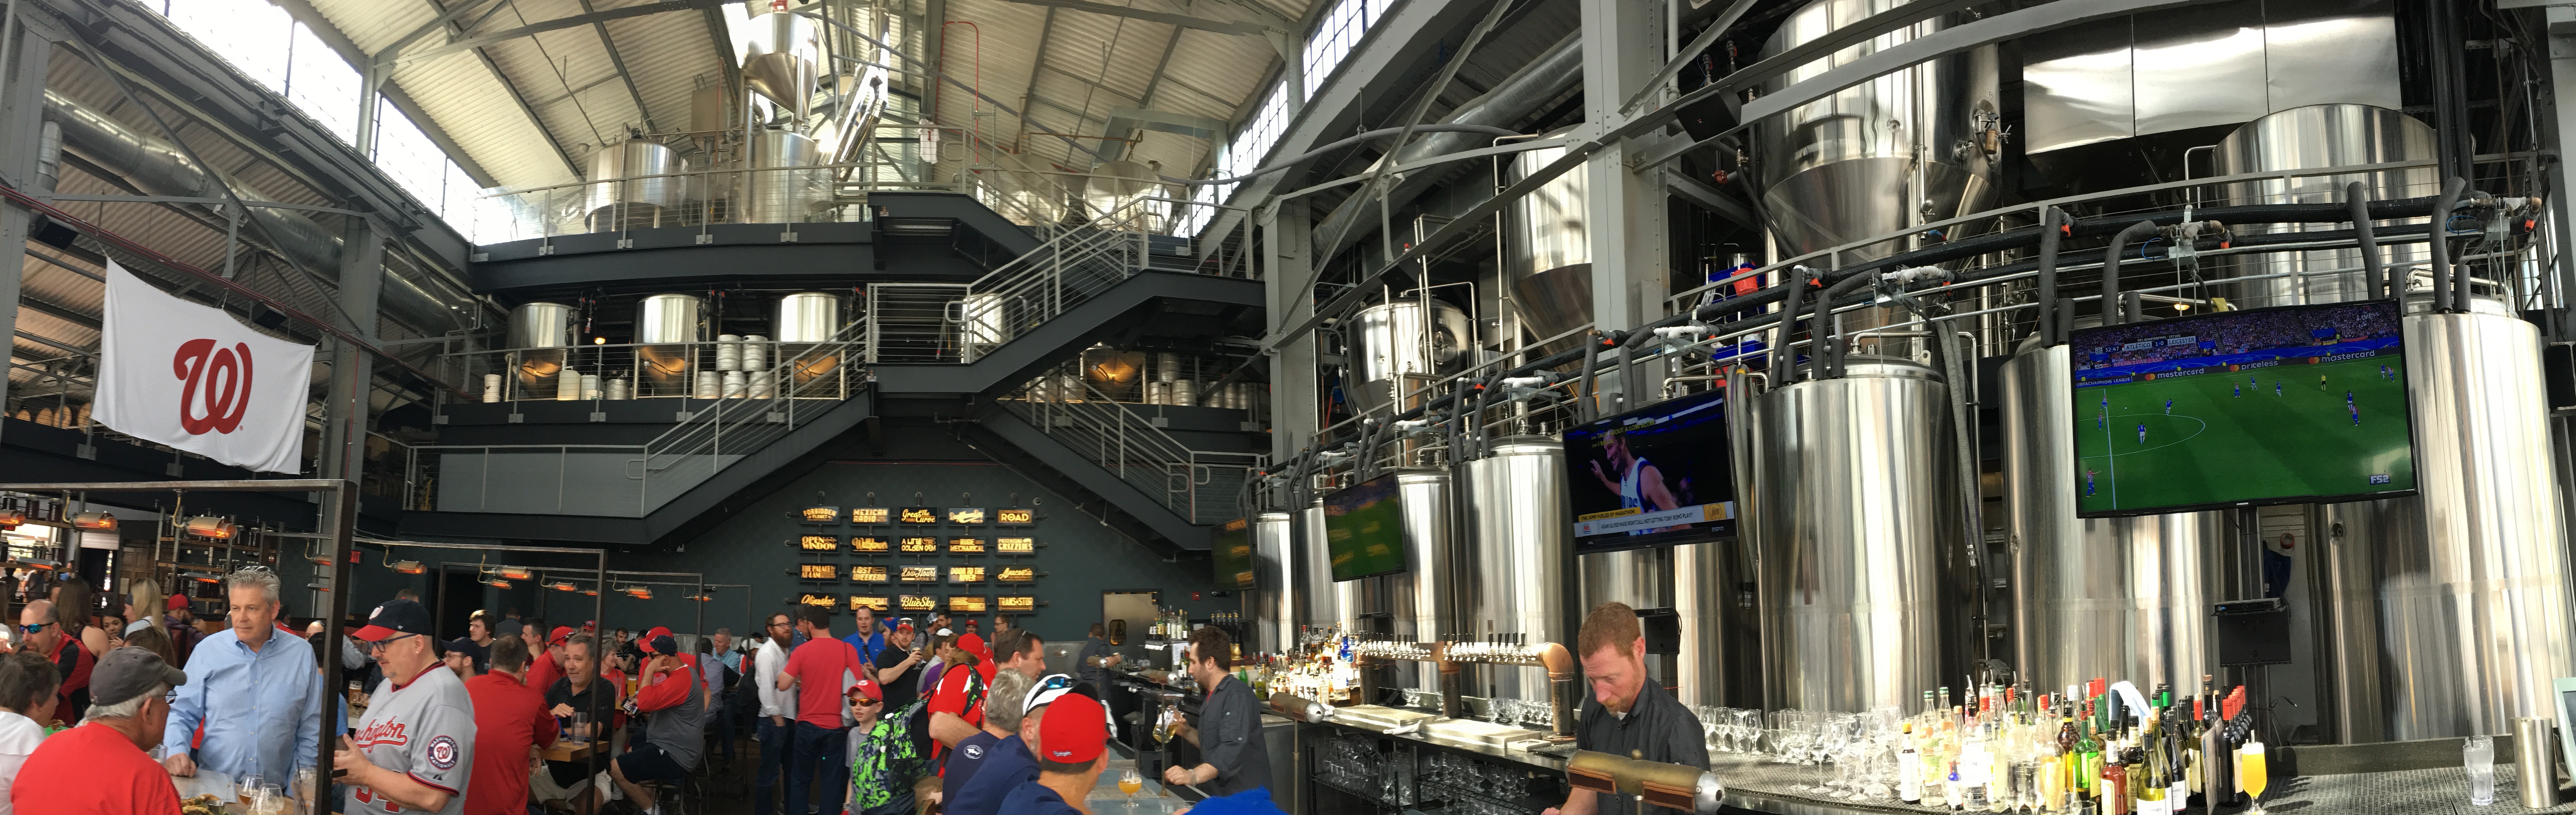 Visiting the Bluejacket Brewery in Washington D.C. during the 2017 Craft Brewers Conference prior to the Washington Nationals game.